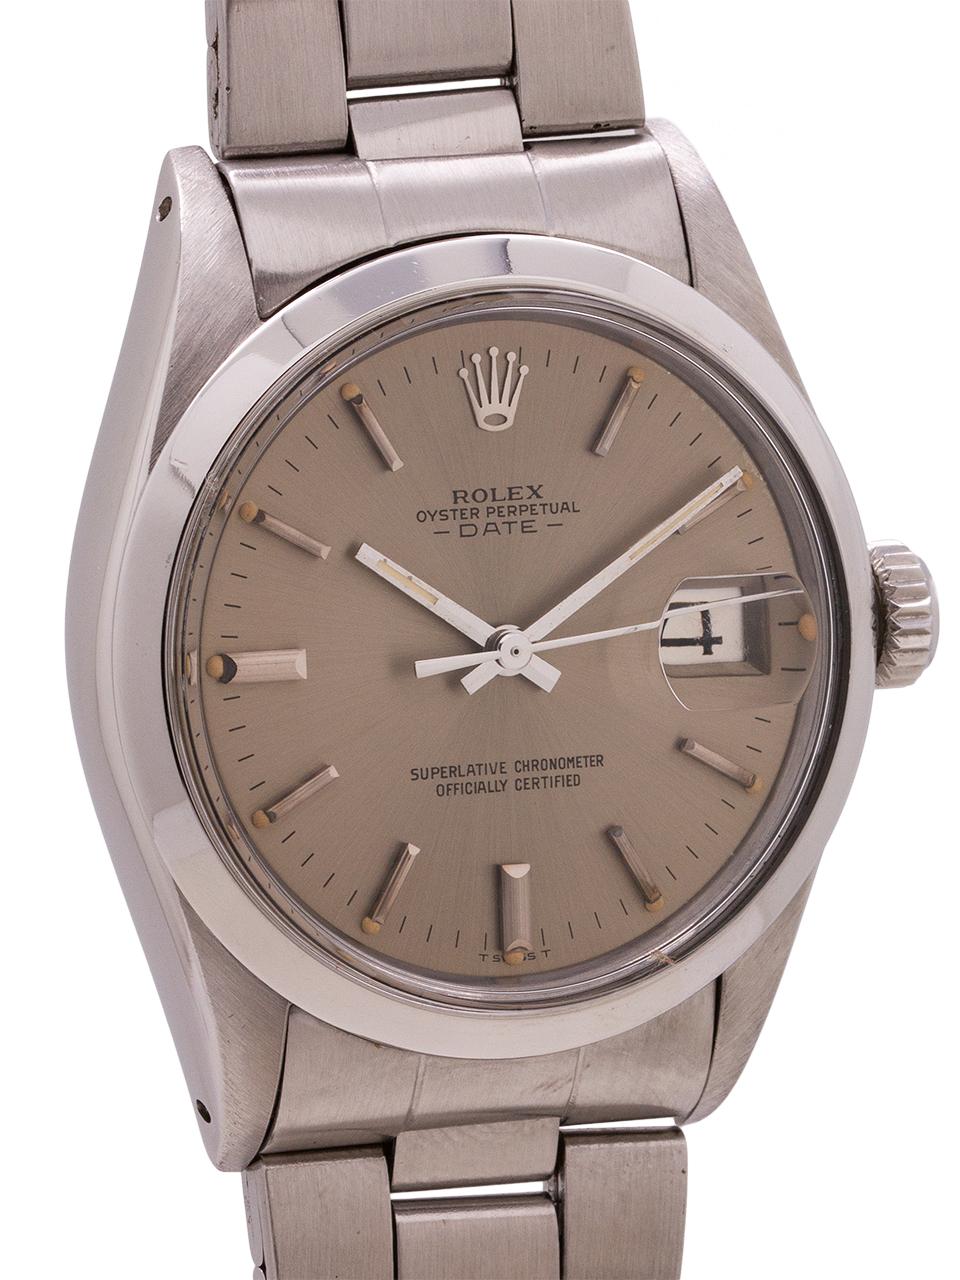 Rolex Oyster Perpetual Date ref 1500 serial # 2.5 million circa 1970. Featuring 34mm diameter stainless steel case with smooth bezel and acrylic crystal. With scarce original gray metallic dial with applied silver indexes and silver baton hands..